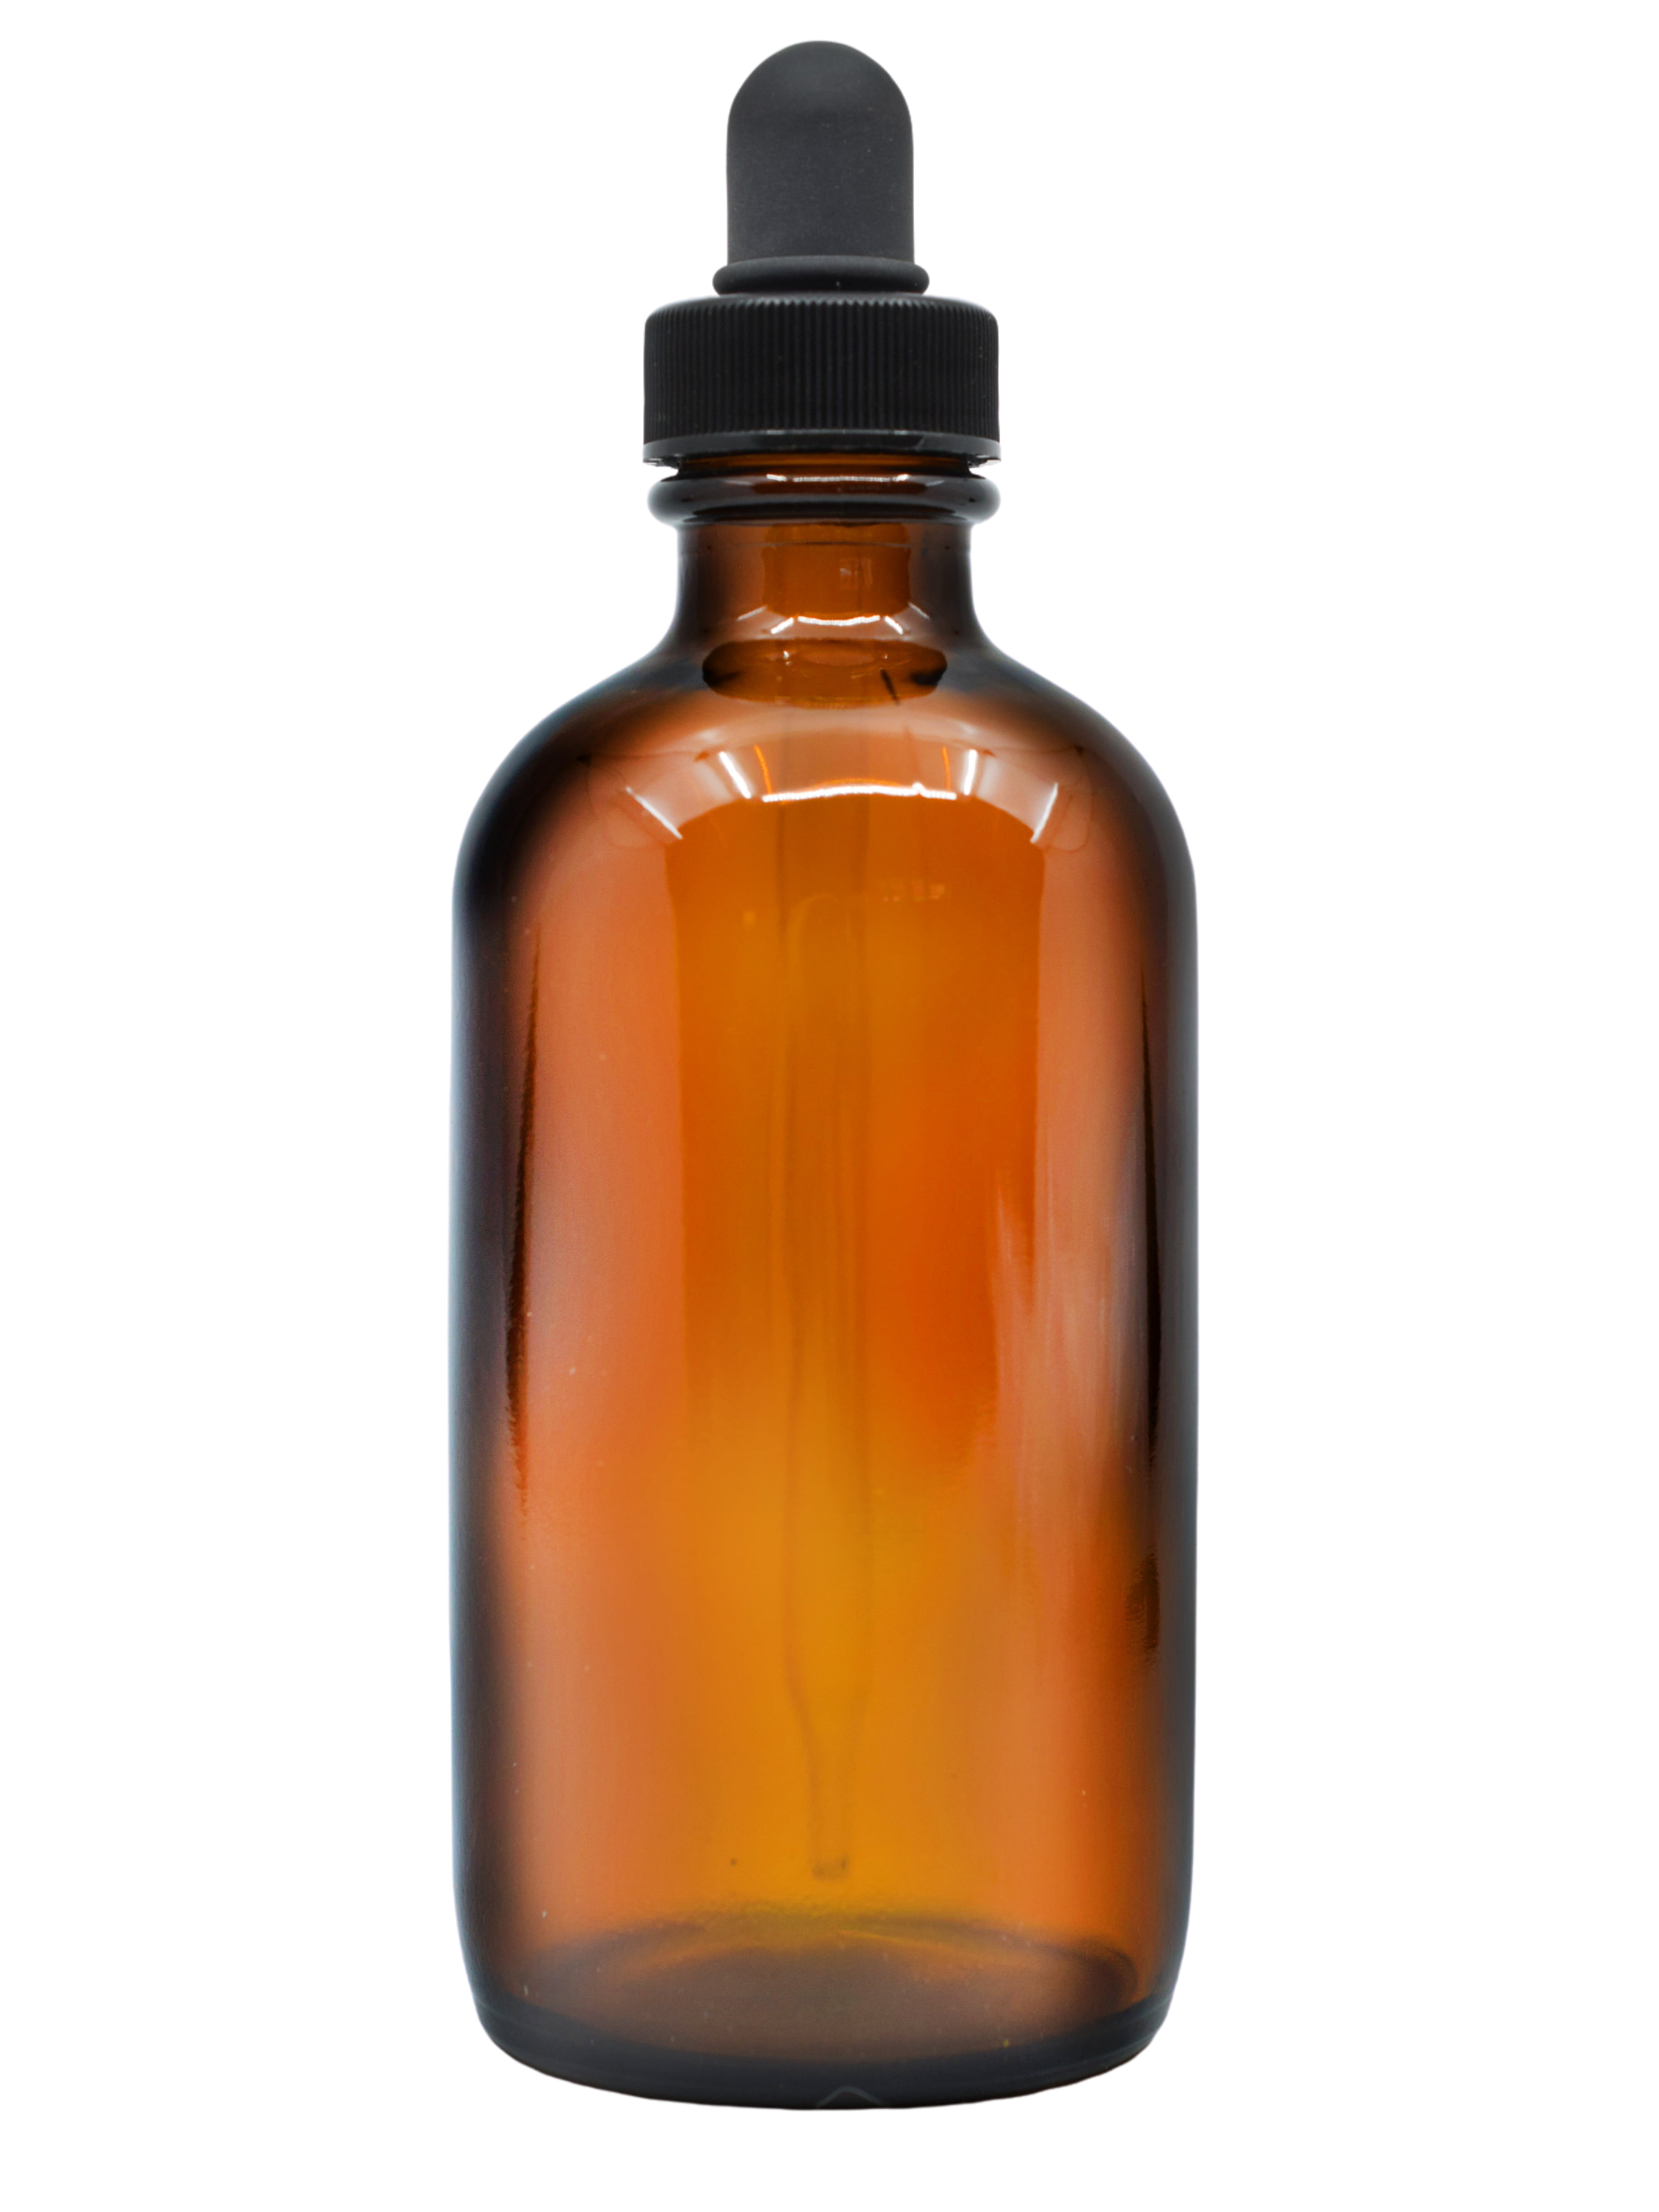 Dropping Bottle, 180ml (6oz) - Amber Soda Glass - Screw Cap with Amber